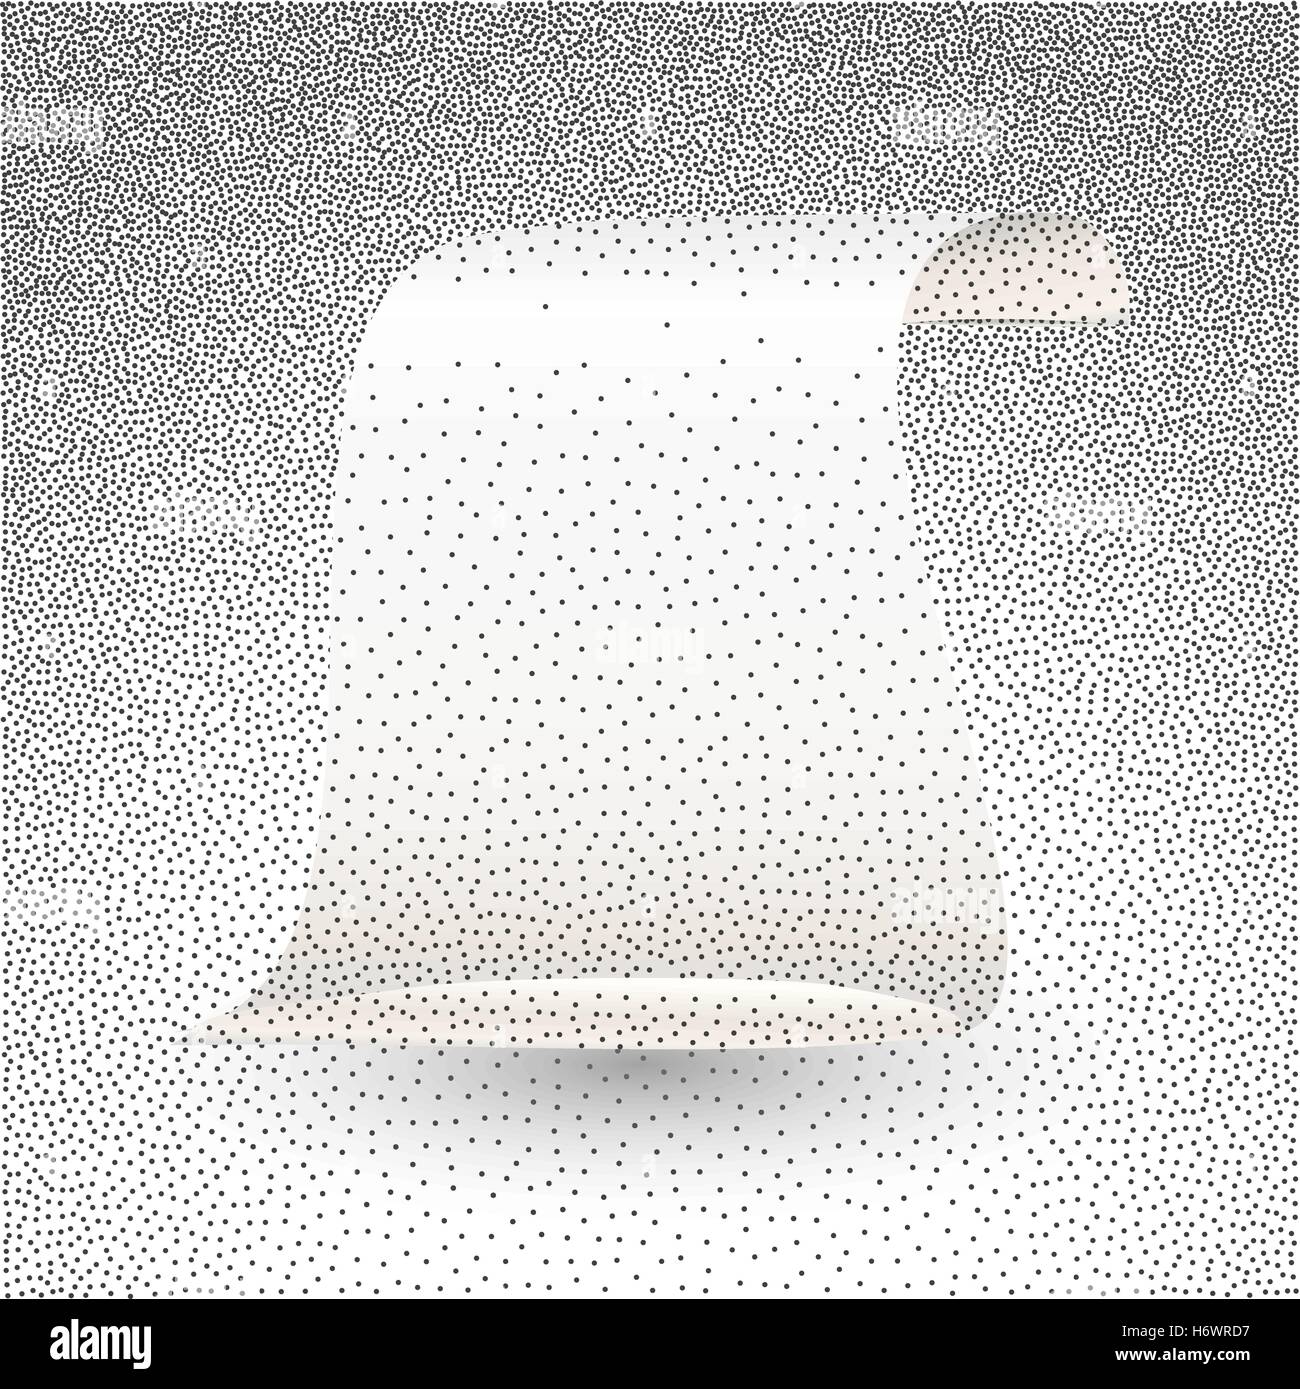 Vector illustration of silver paper scroll. Roll of stippled paper, imitation of dotted effect. Stock Vector